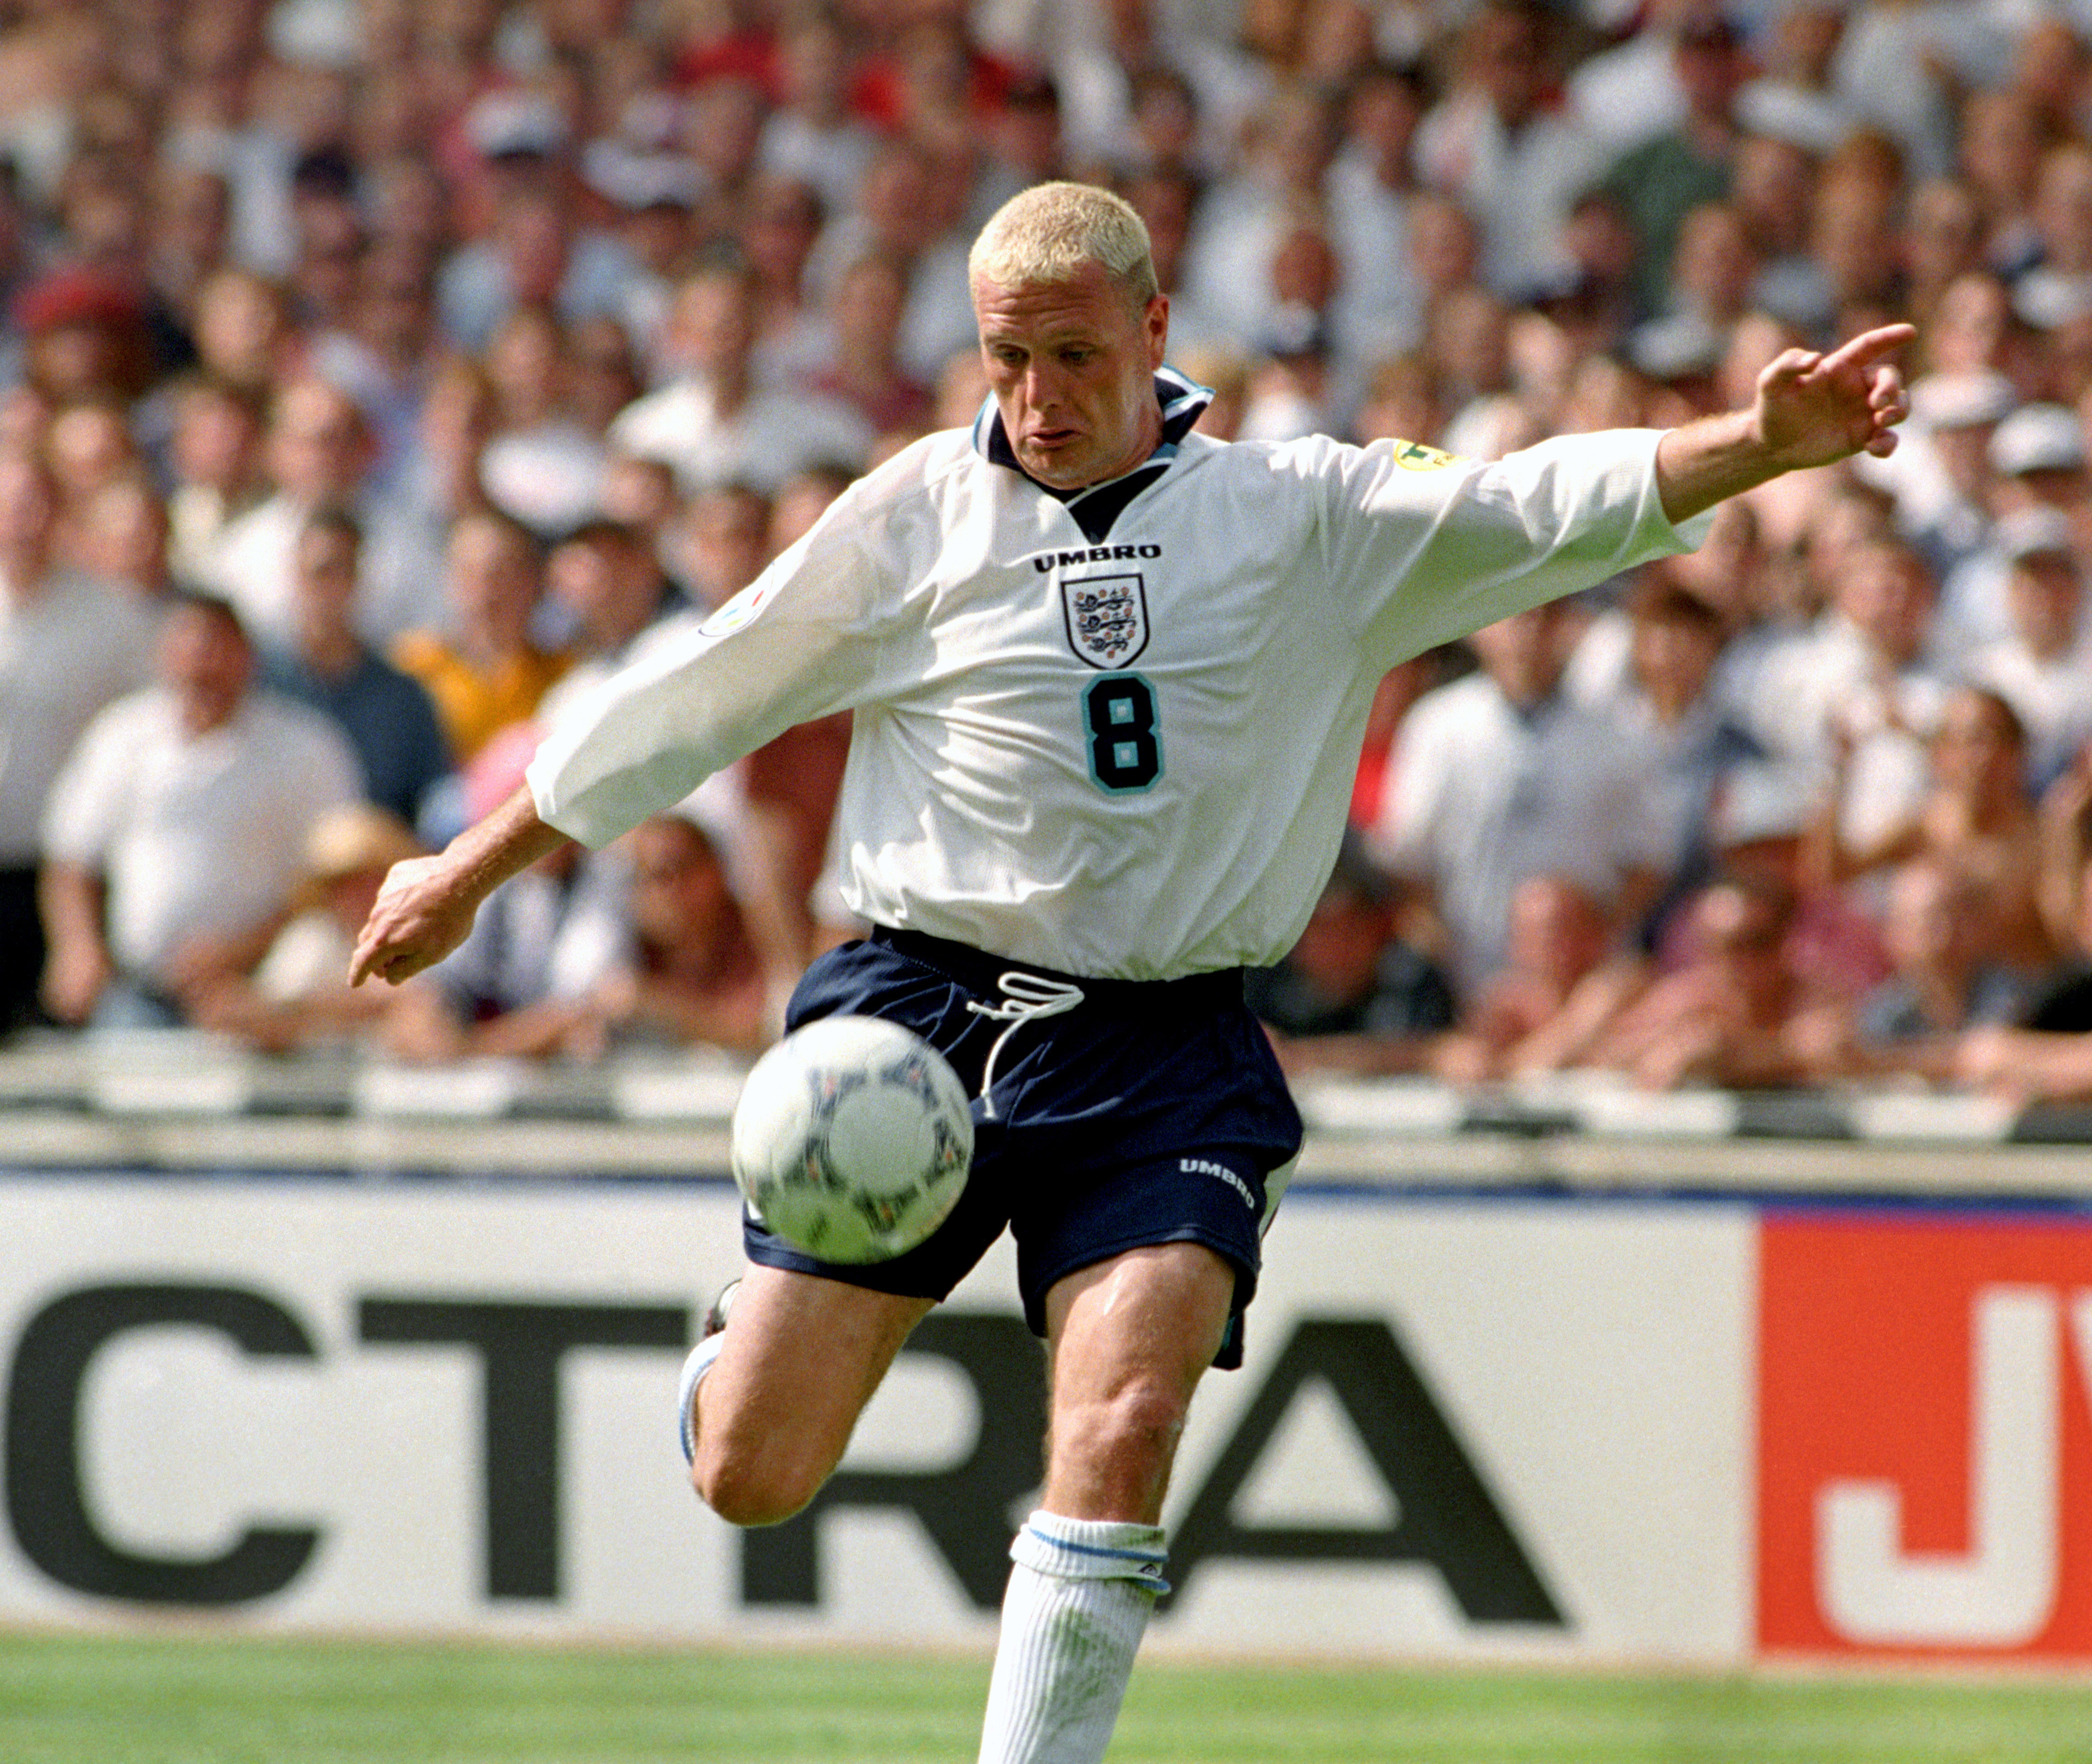 Paul Gascoigne scores England’s second goal in the Euro 96 match against Scotland, at Wembley